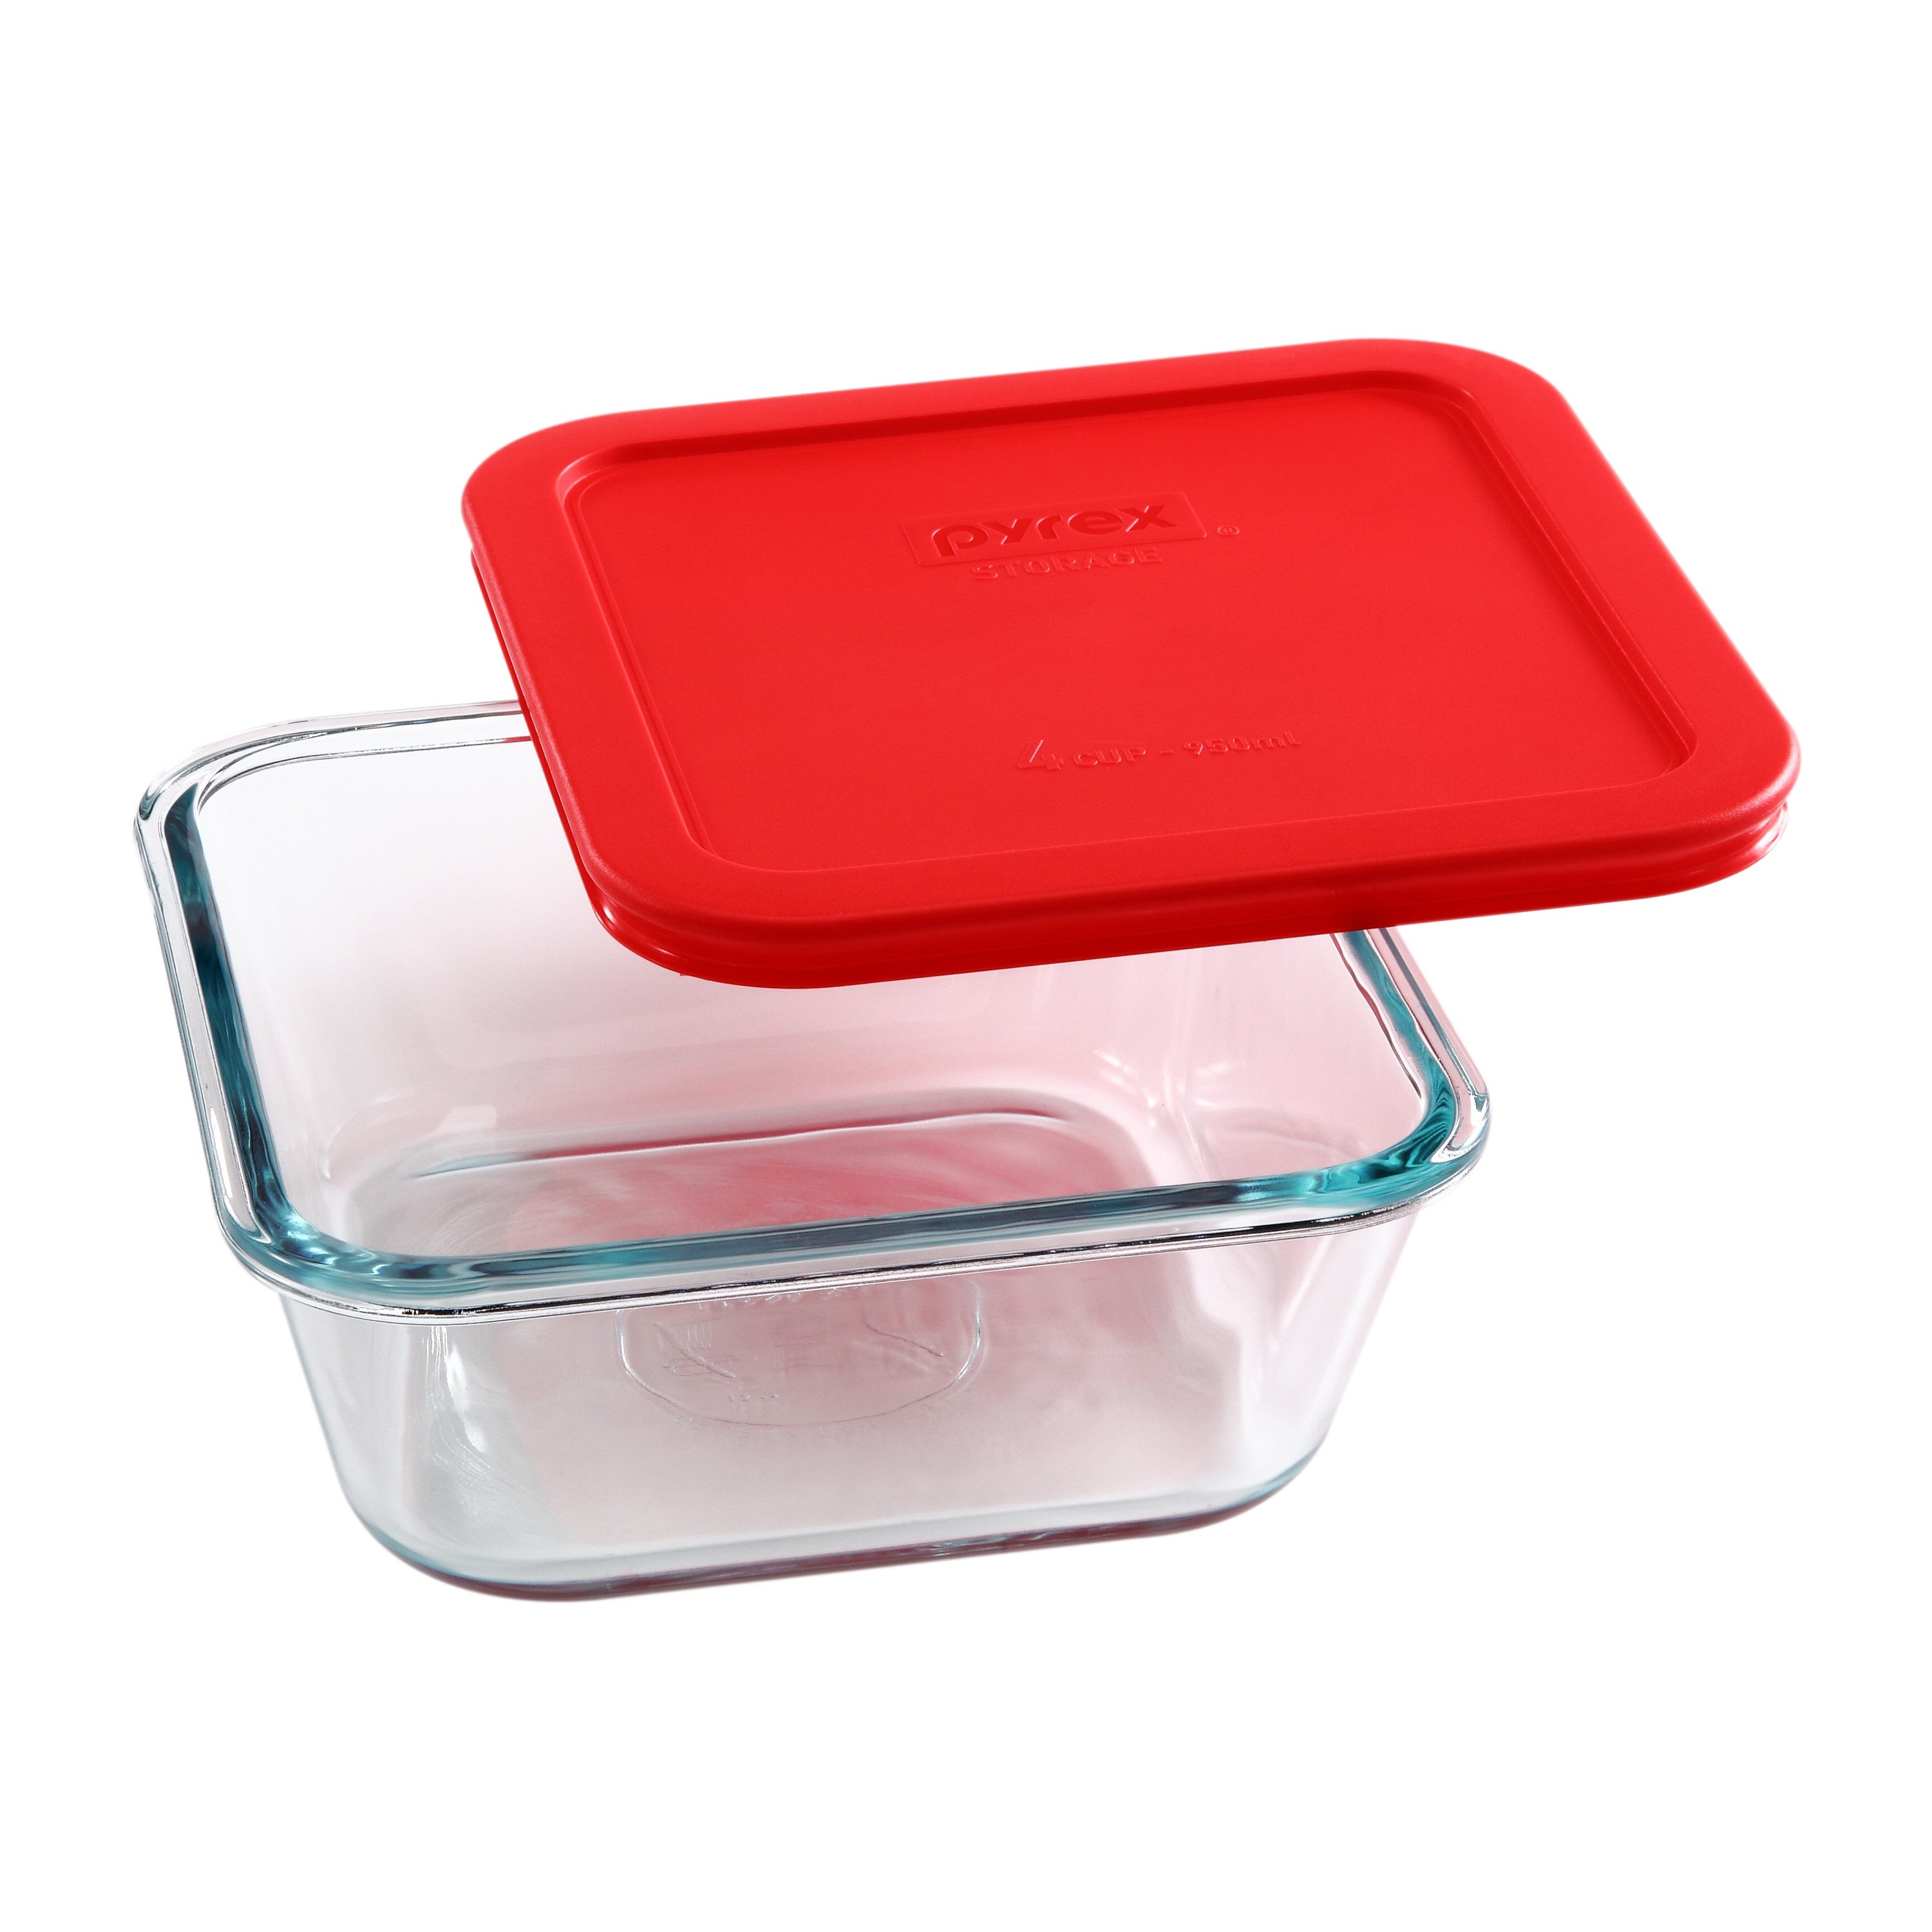 Pyrex® Storage Red 4 Cup Square